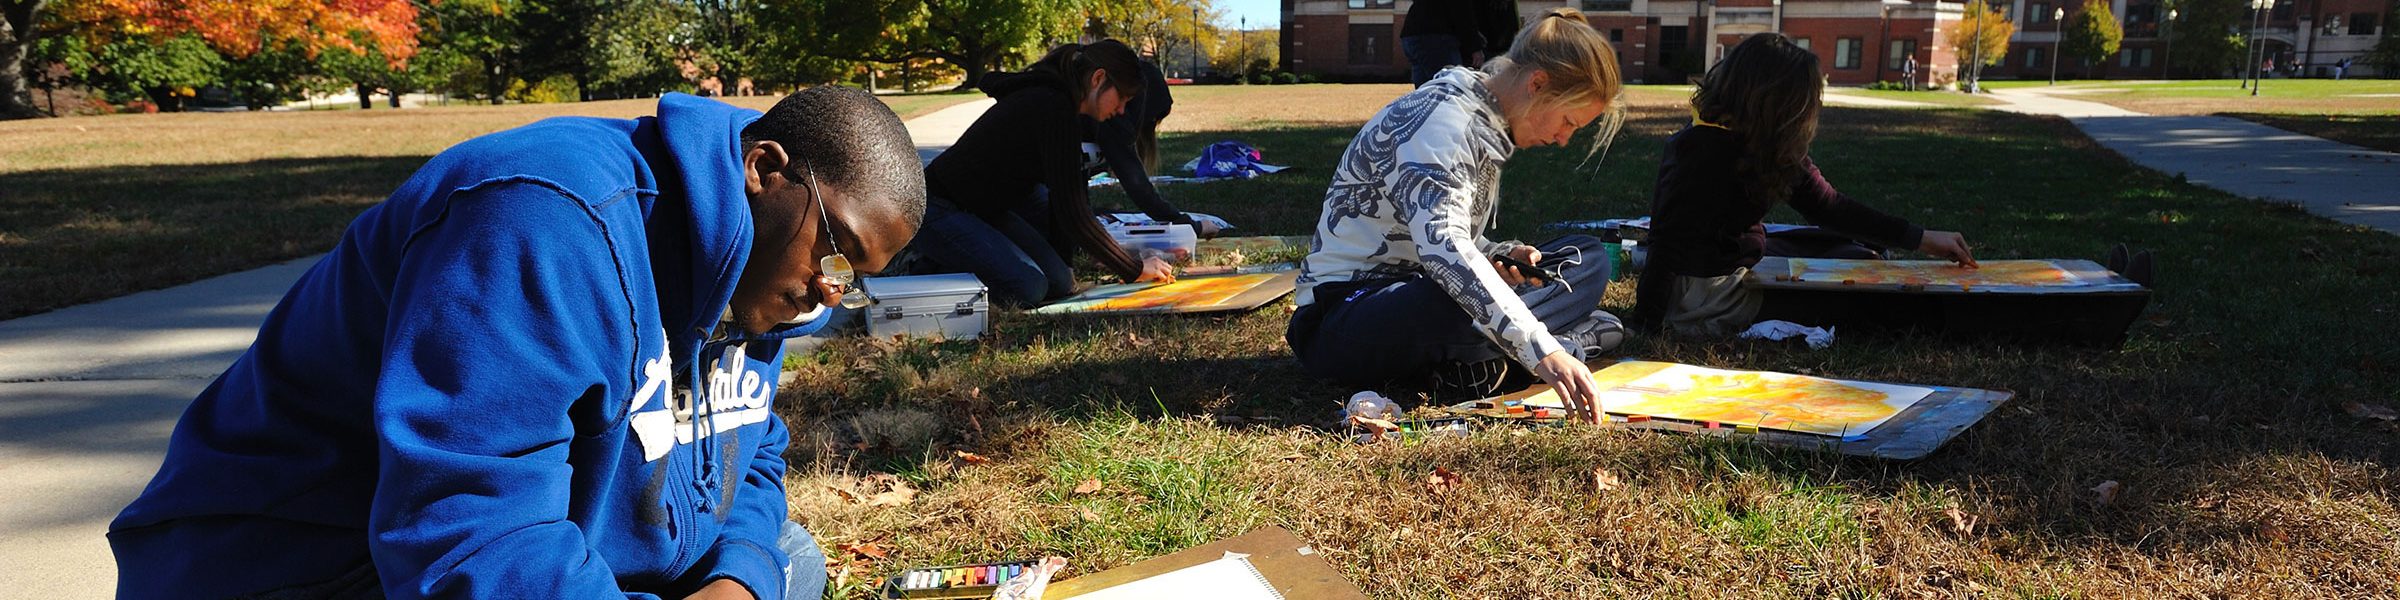 Four UConn Art & Art History students sitting and working with pastels in the south quad lawn during the Fall